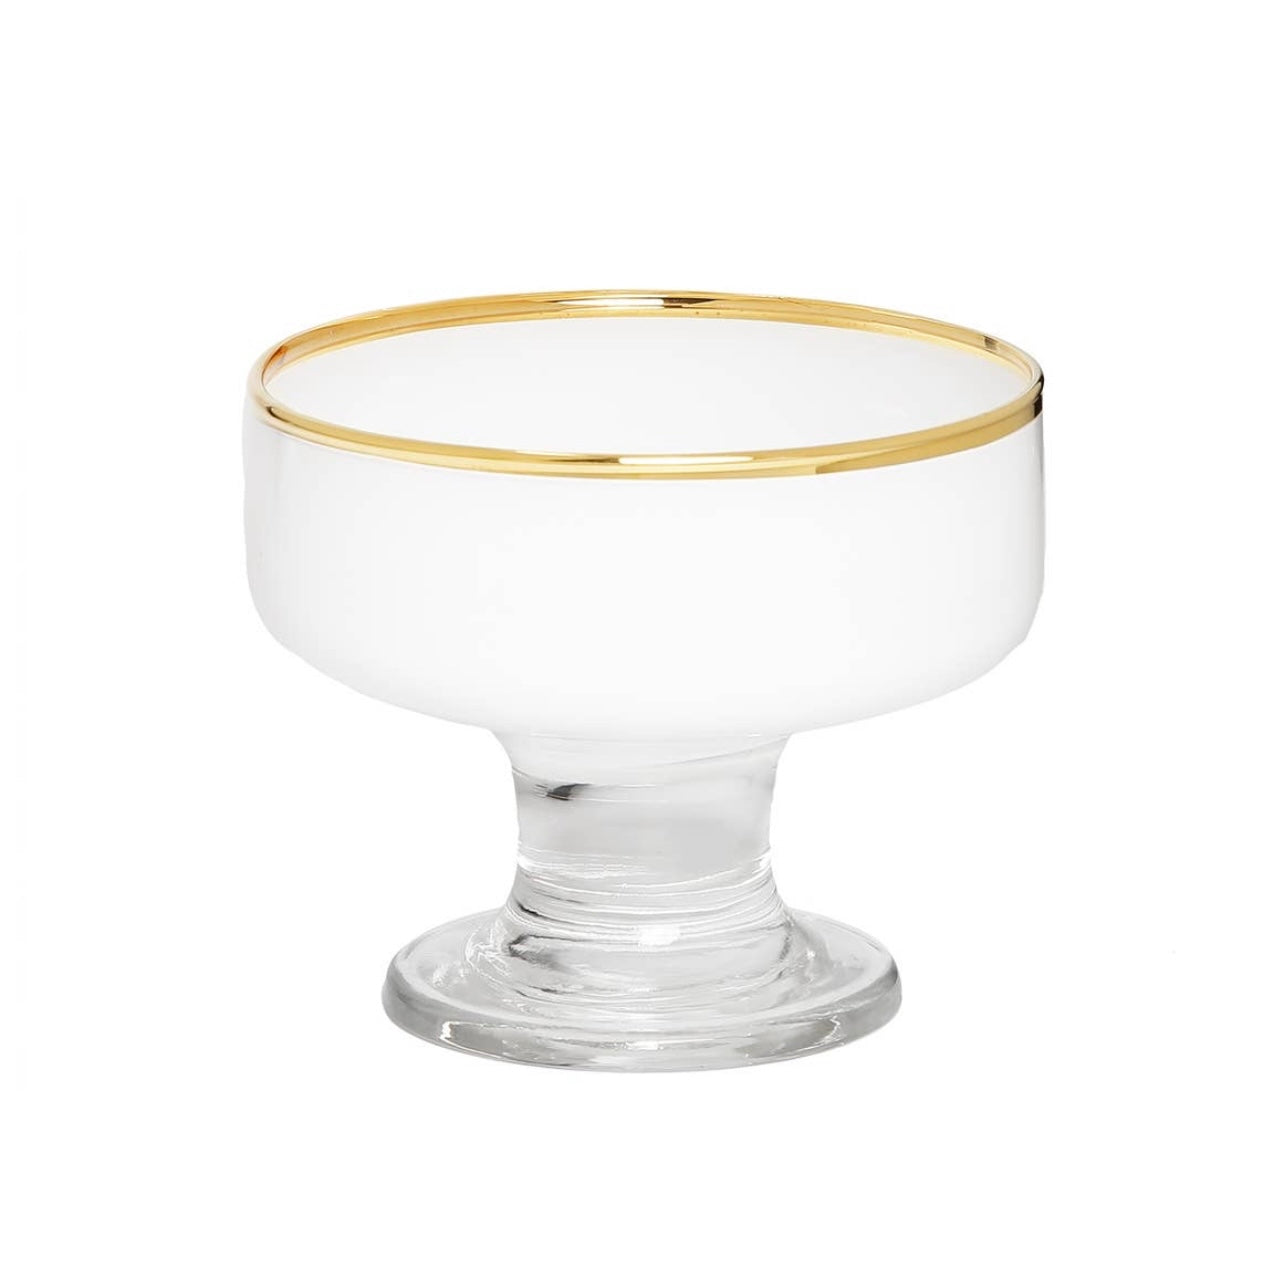 Set of 6 White Dessert Cups With Clear Stem And Gold Rim